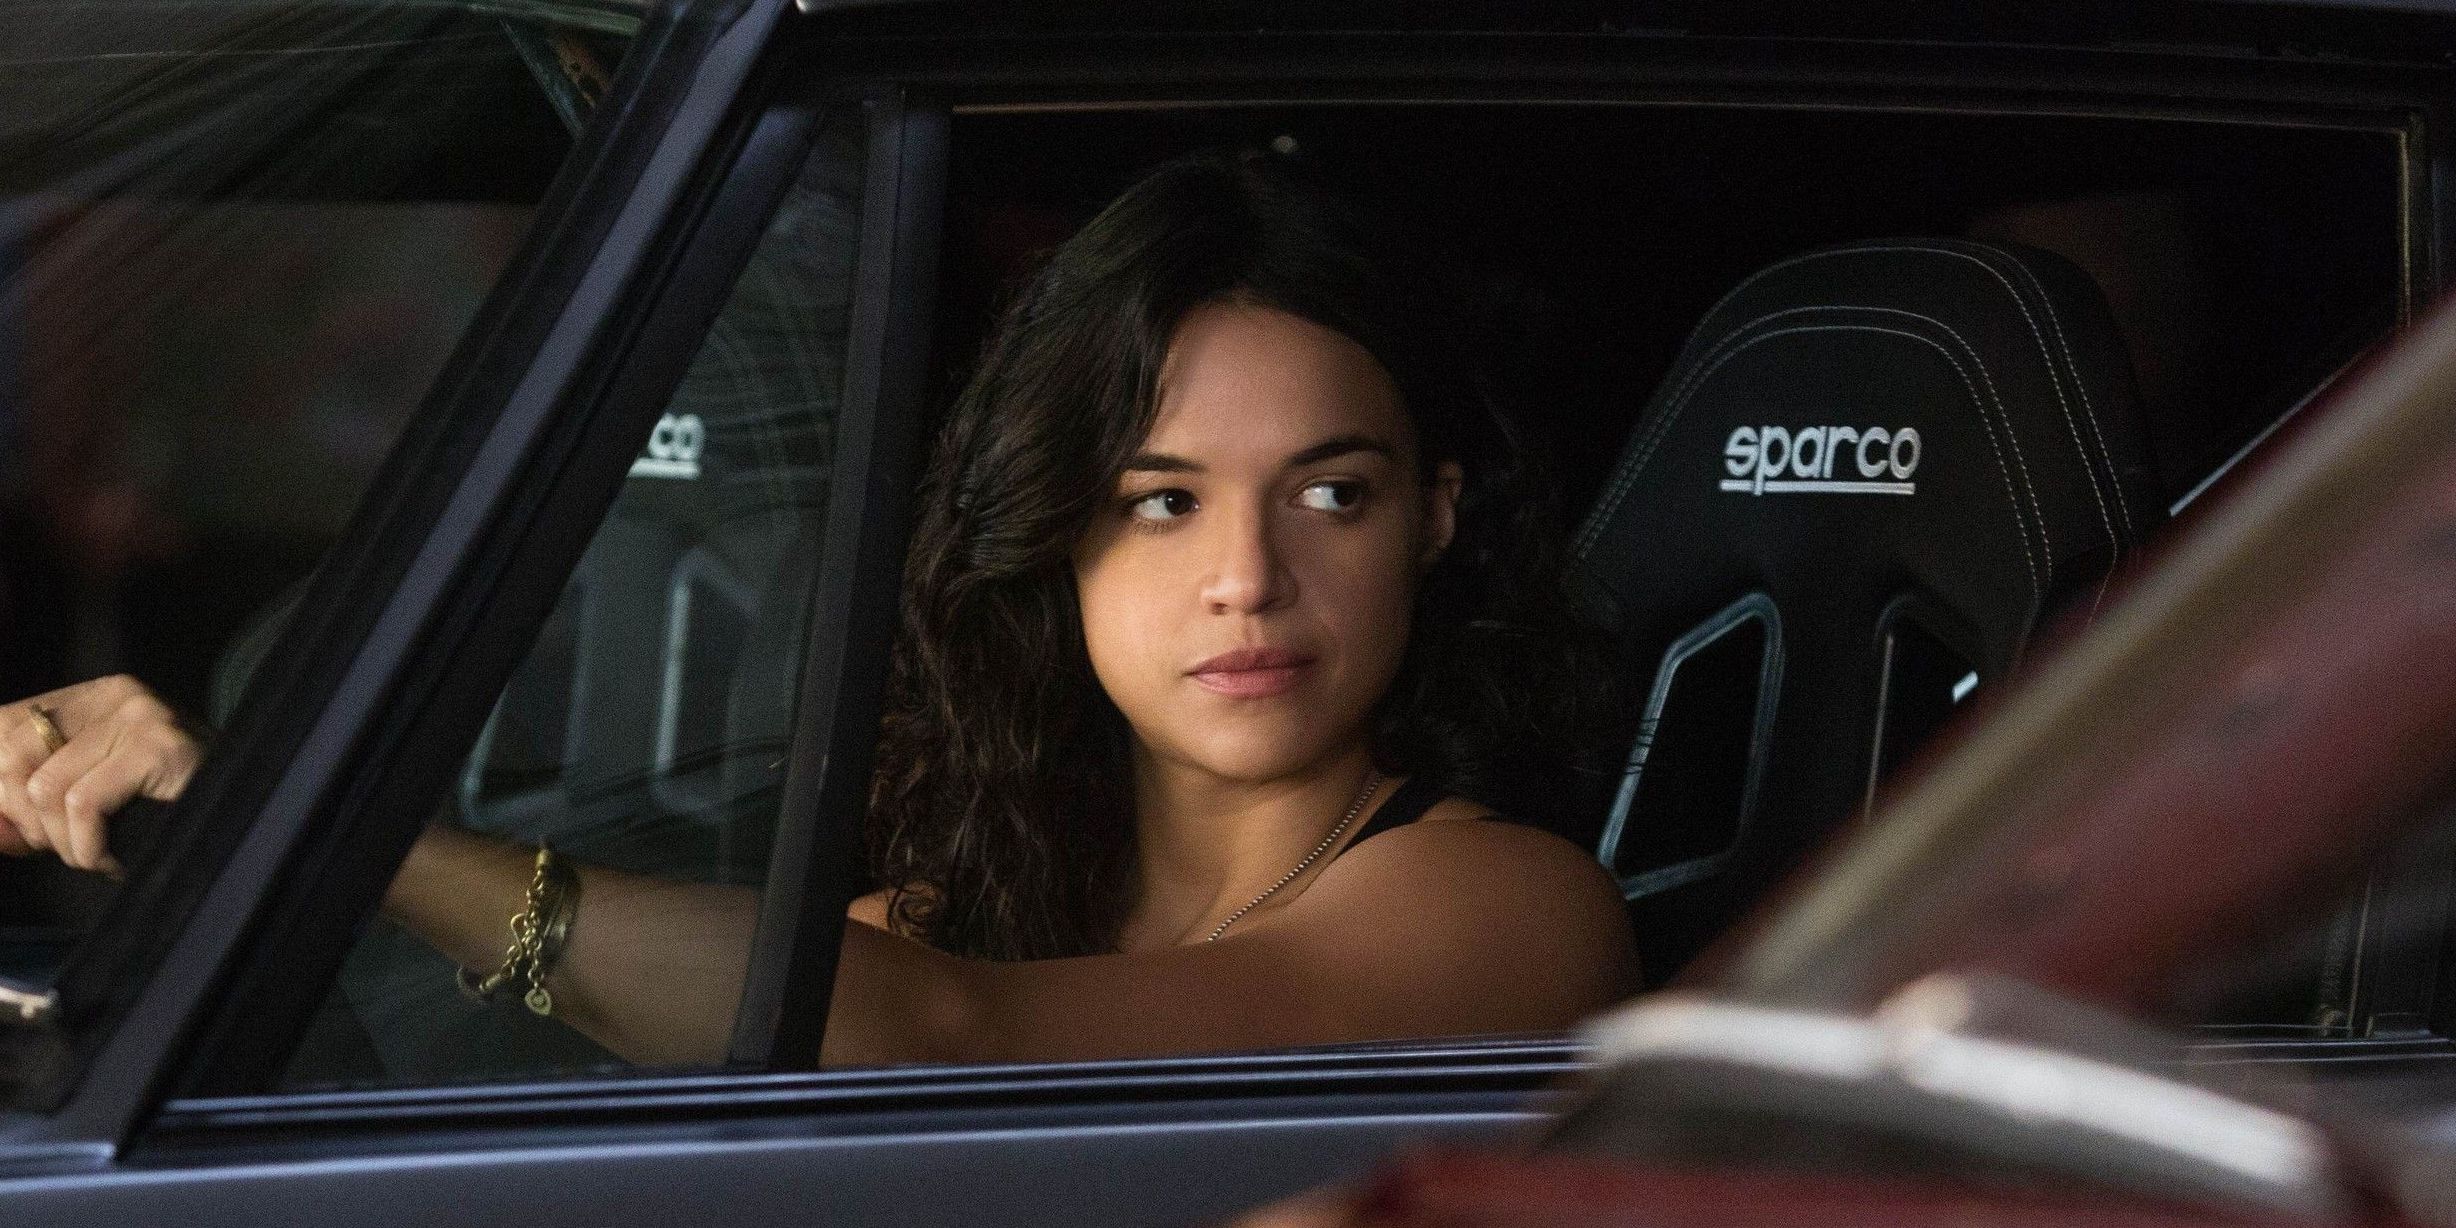 Letty Ortiz driving a car and looking out her window at someone